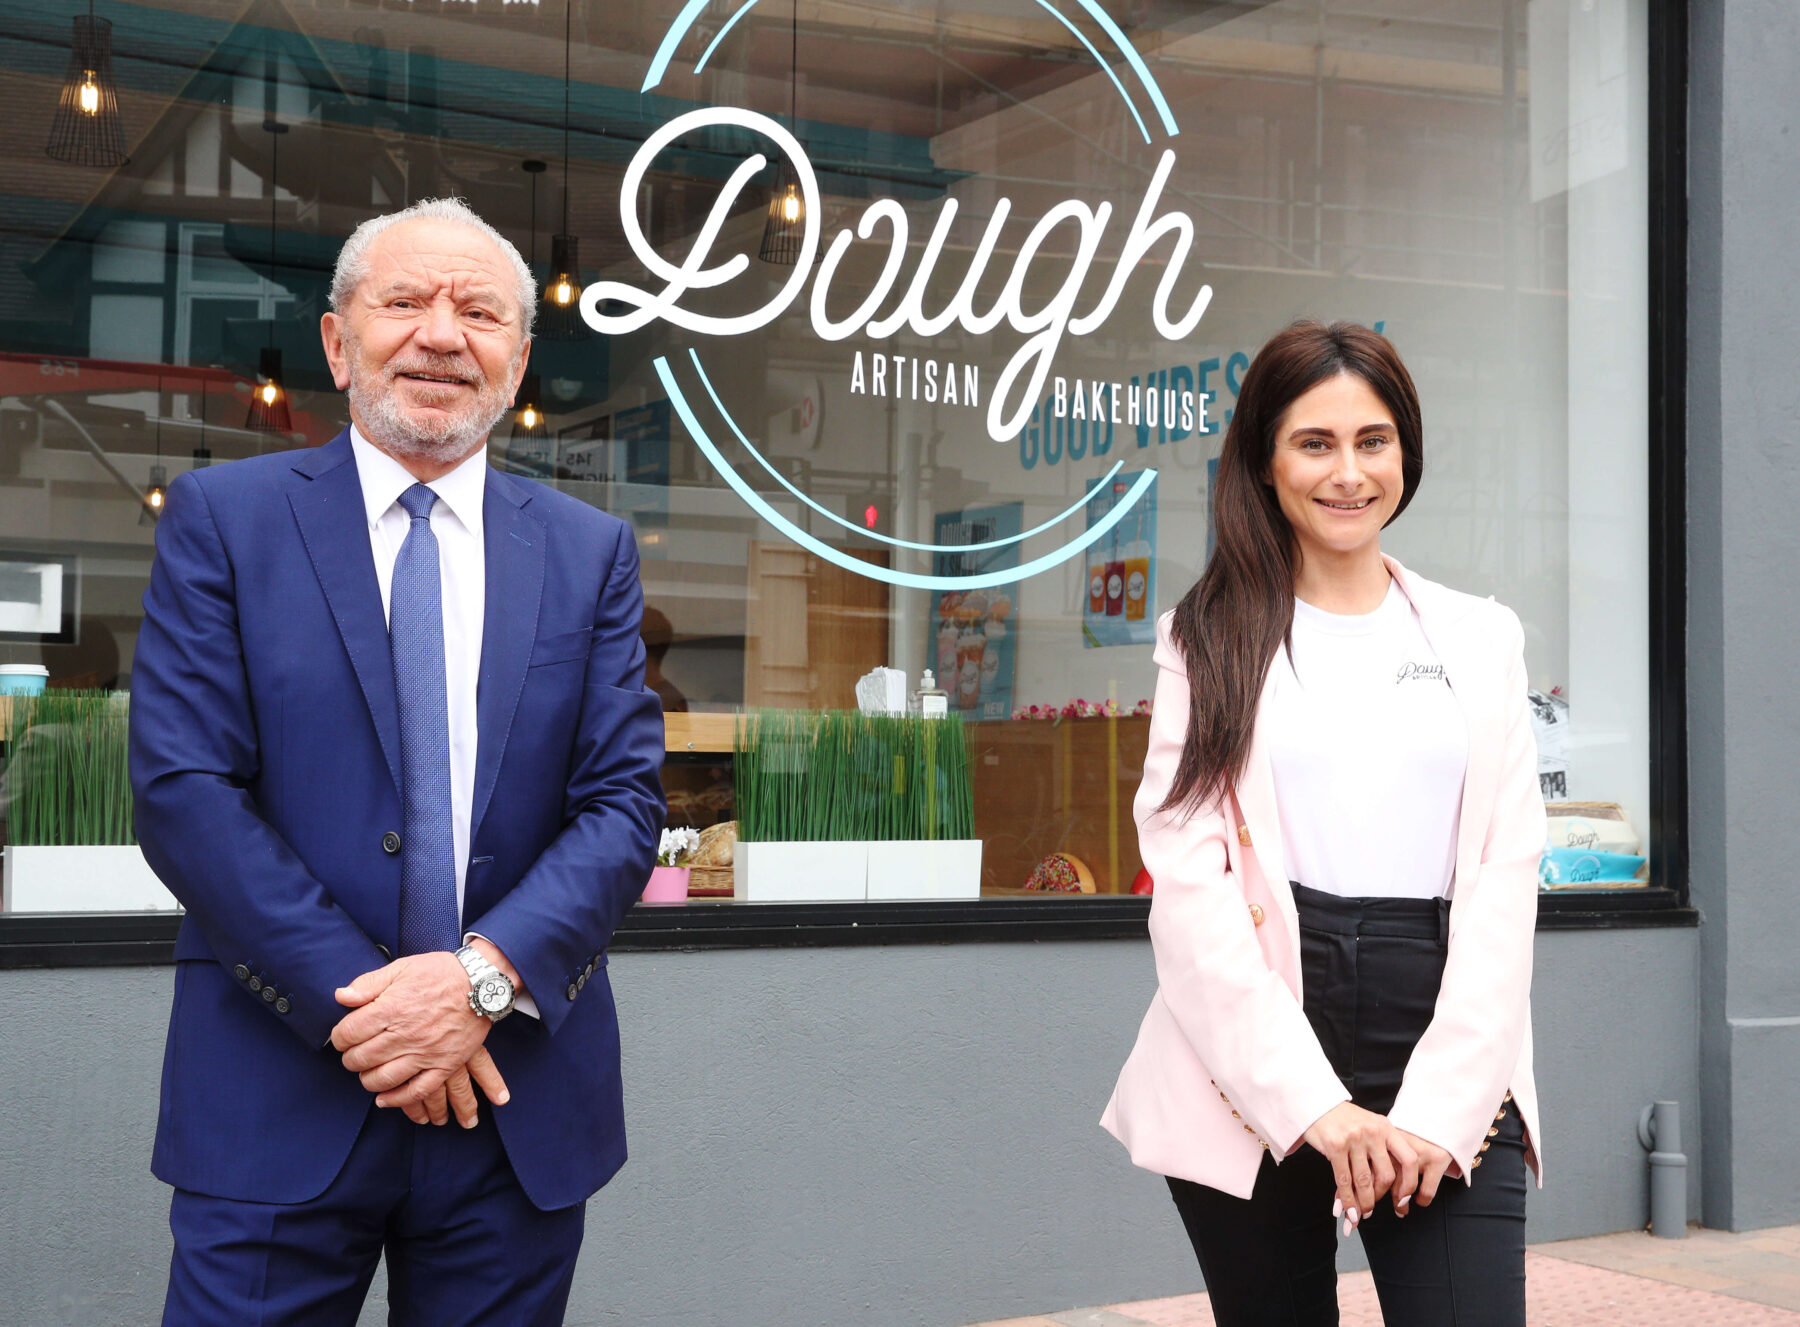 Carina Lepore with Lord Alan Sugar outside Dough Artisan bakehouse 2 scaled